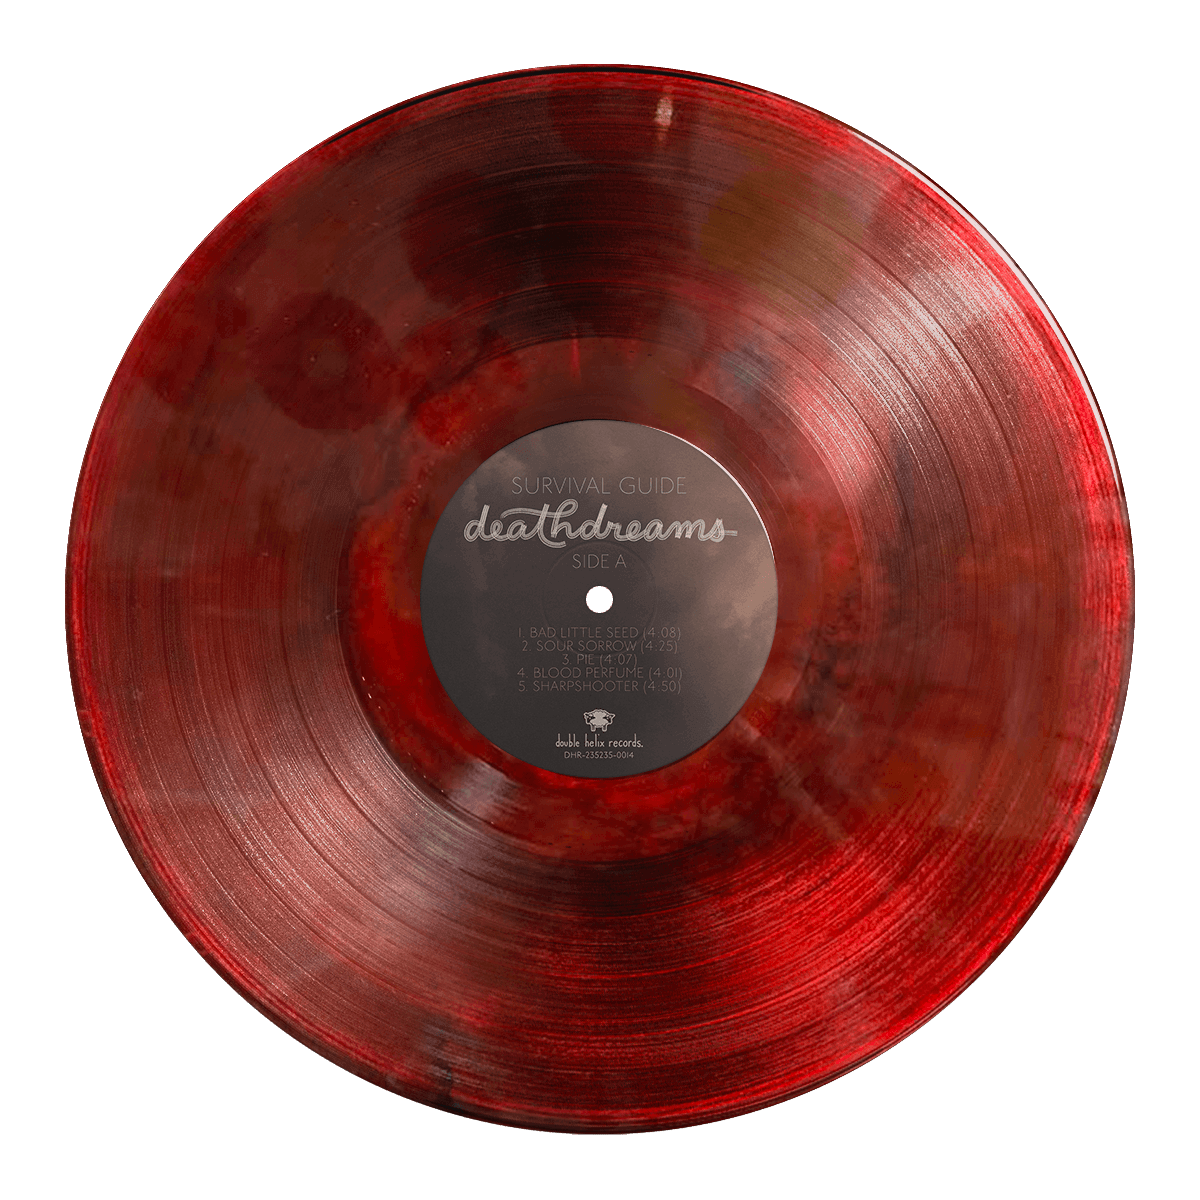 deathdreams Blood Variant Vinyl (Limited Edition of 100)